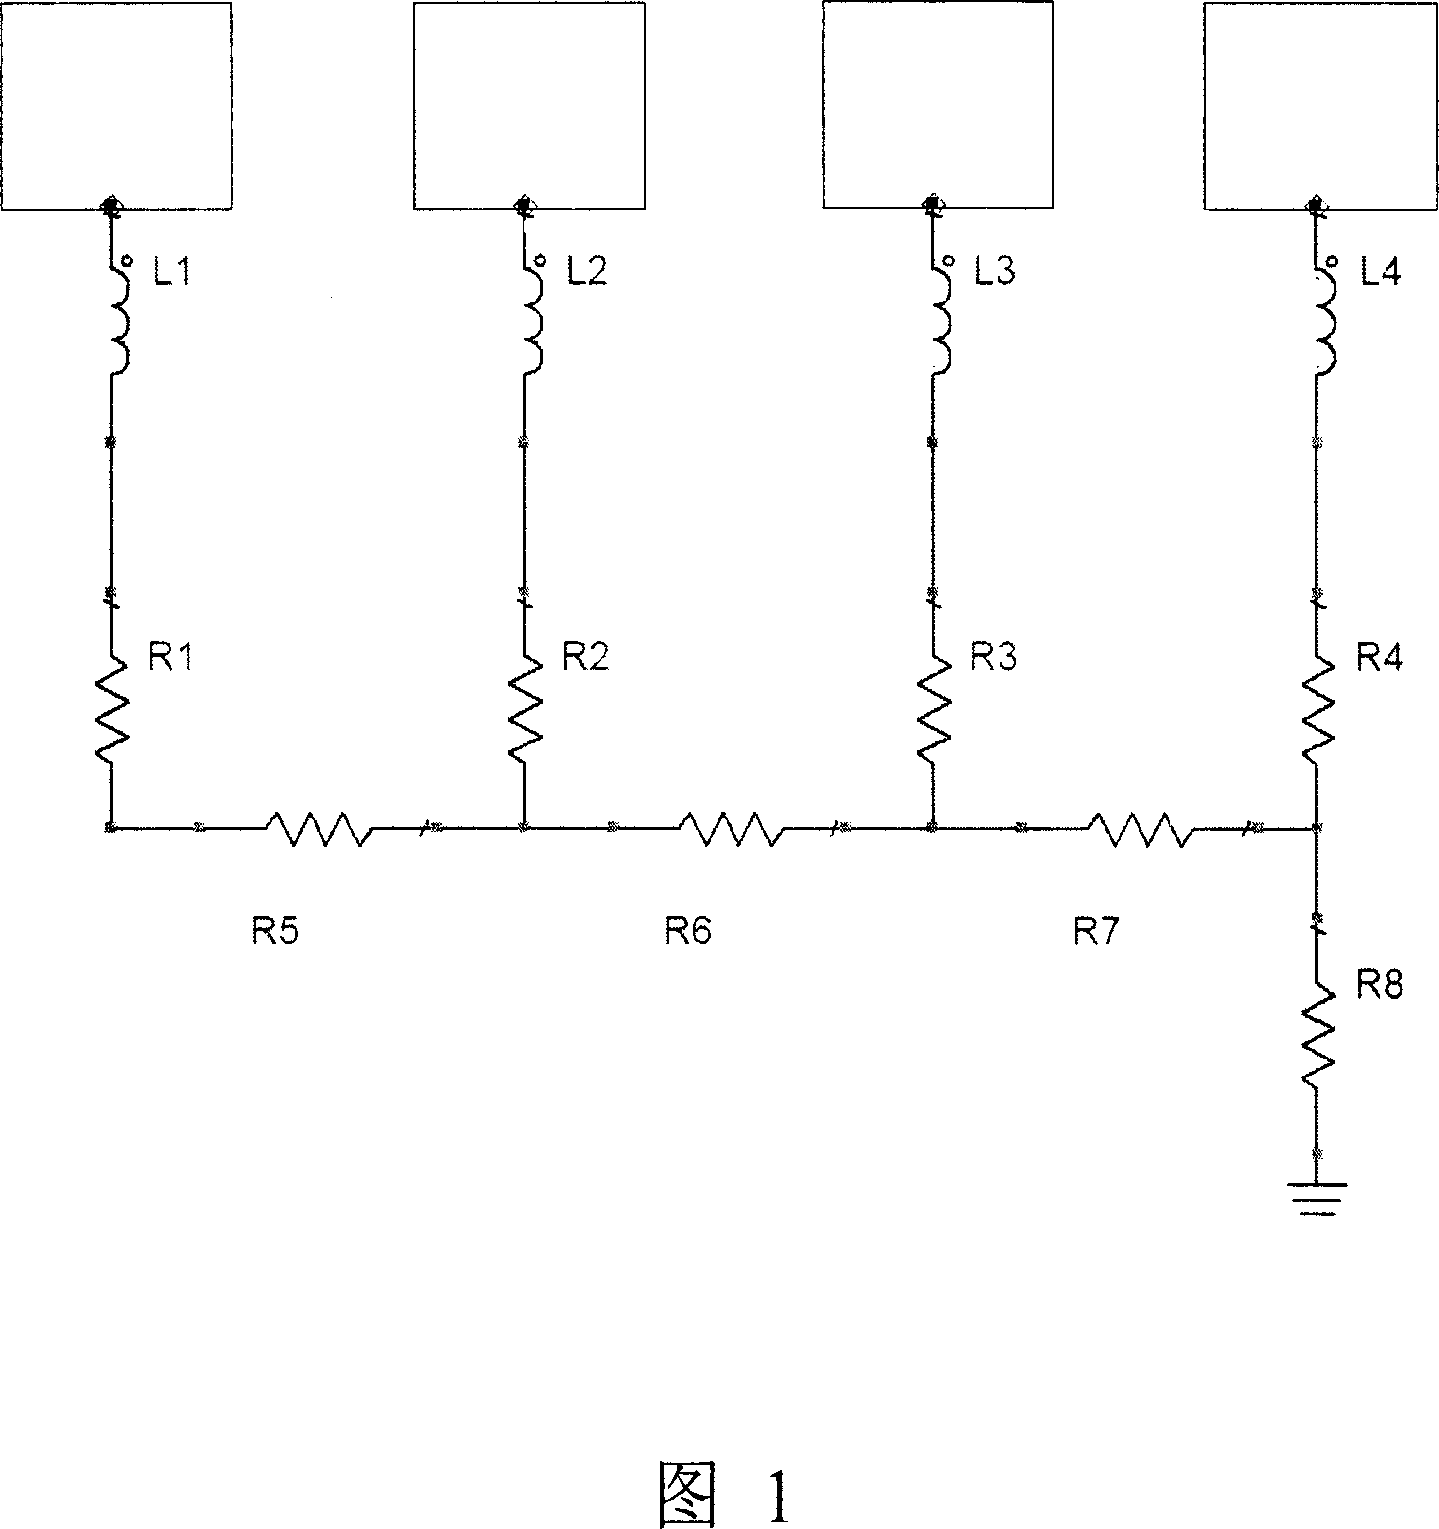 Ground wire layout graph for reducing microwave single-sheet integrated circuit standing wave ratio